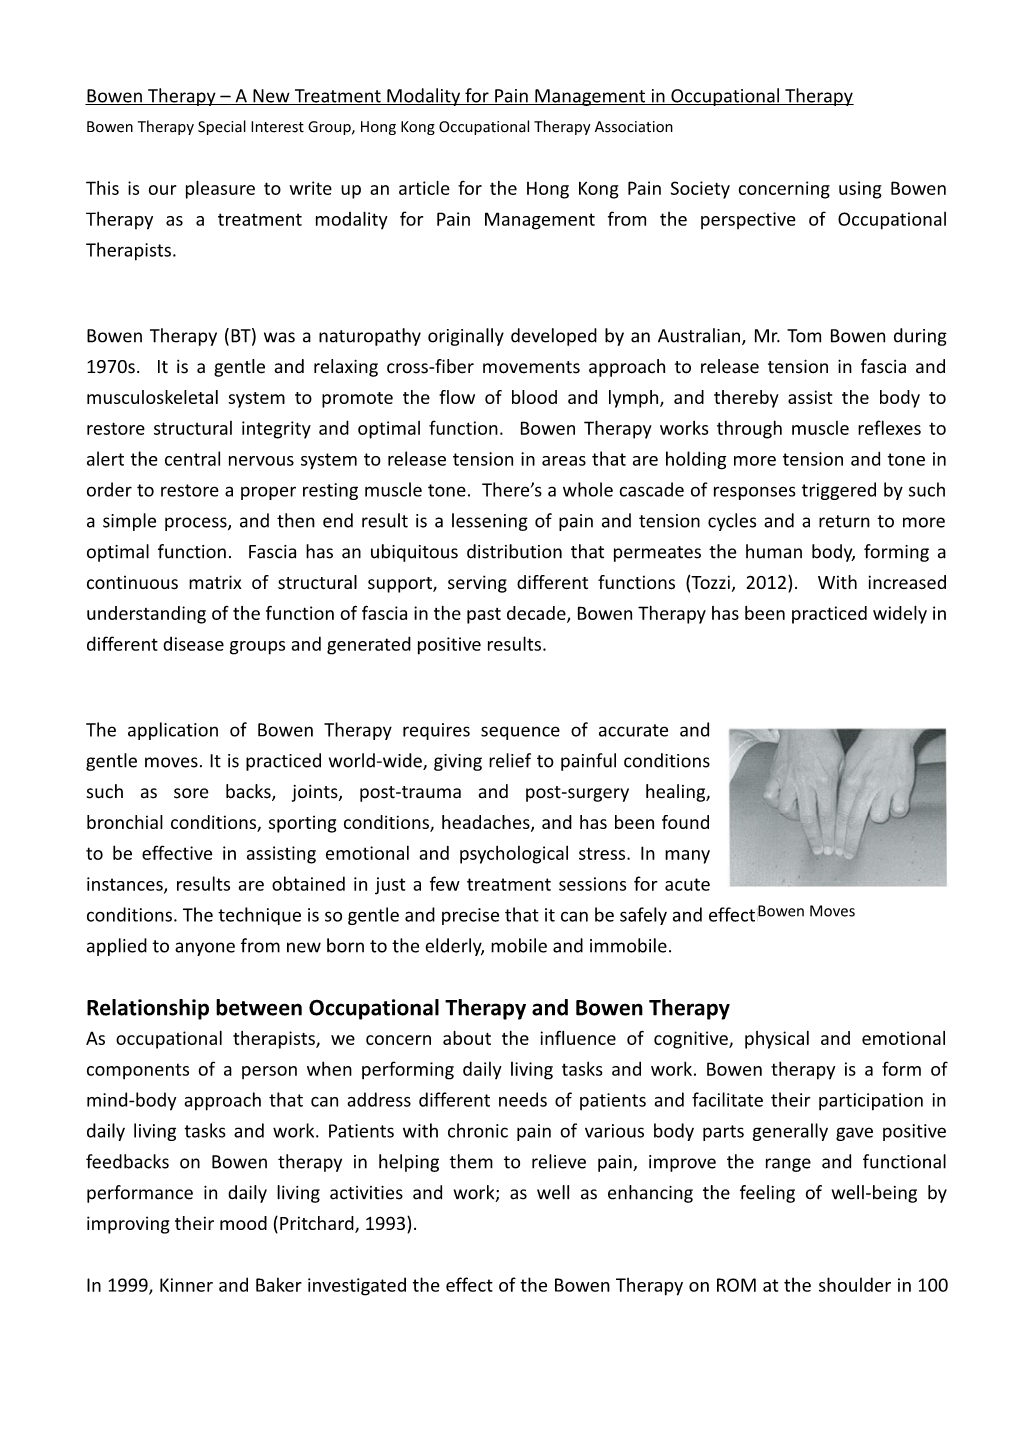 Bowen Therapy a New Treatment Modality for Pain Management in Occupational Therapy